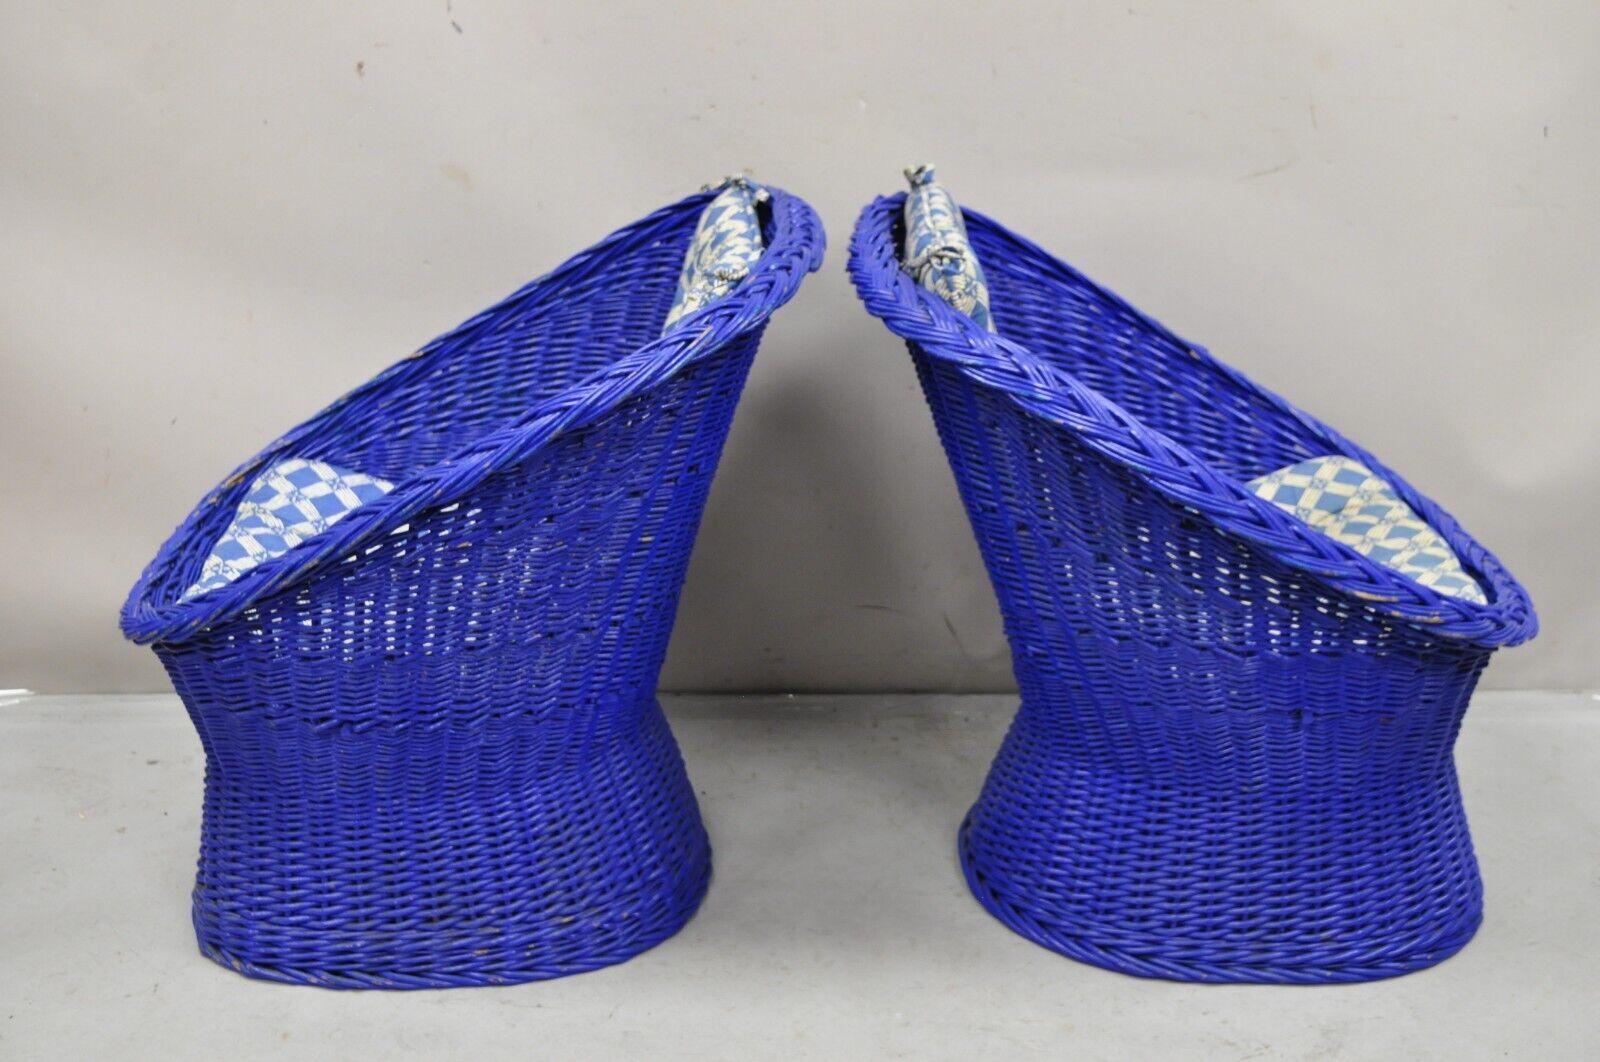 Mid-Century Modern Vintage Mid Century Modern Blue Painted Wicker Rattan Pod Club Chairs - a Pair For Sale